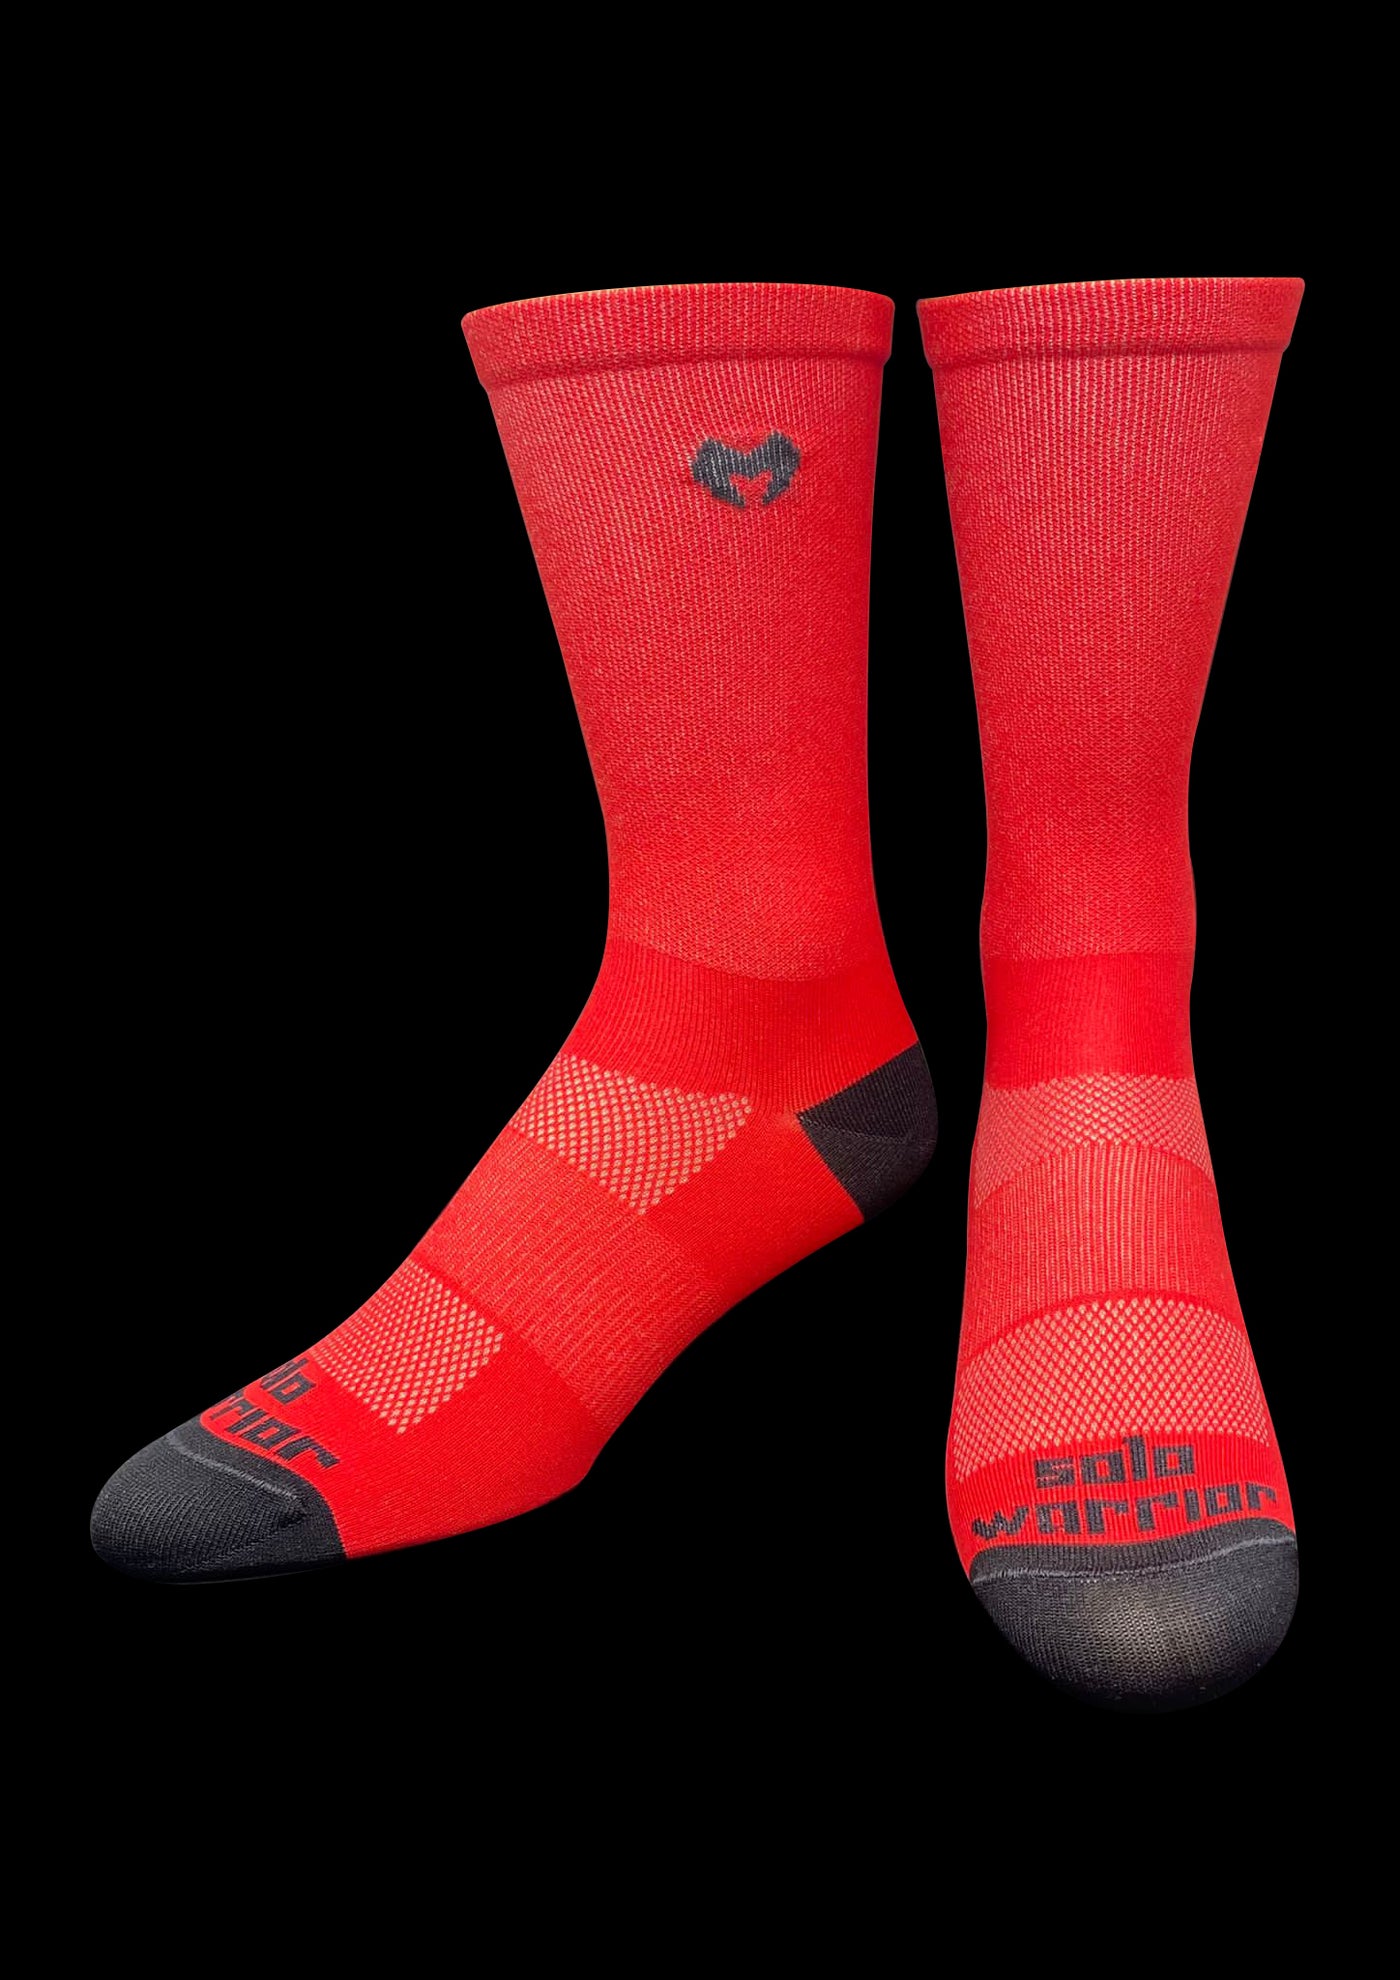 6” Men’s and Women’s solid red and black cycling socks with compression.